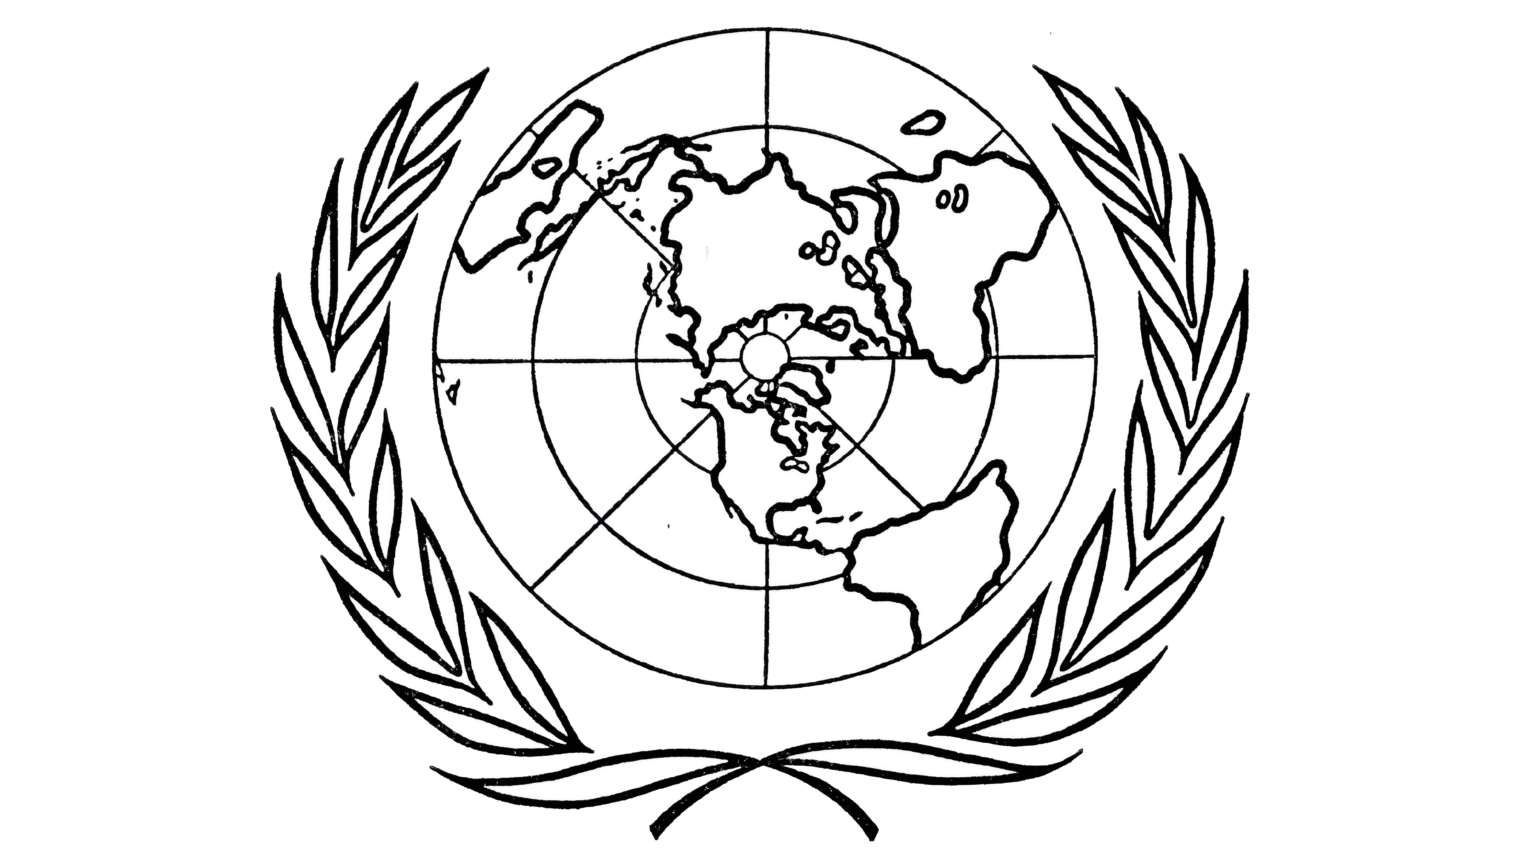 United Nations Logo and sign, new logo meaning and history, PNG, SVG